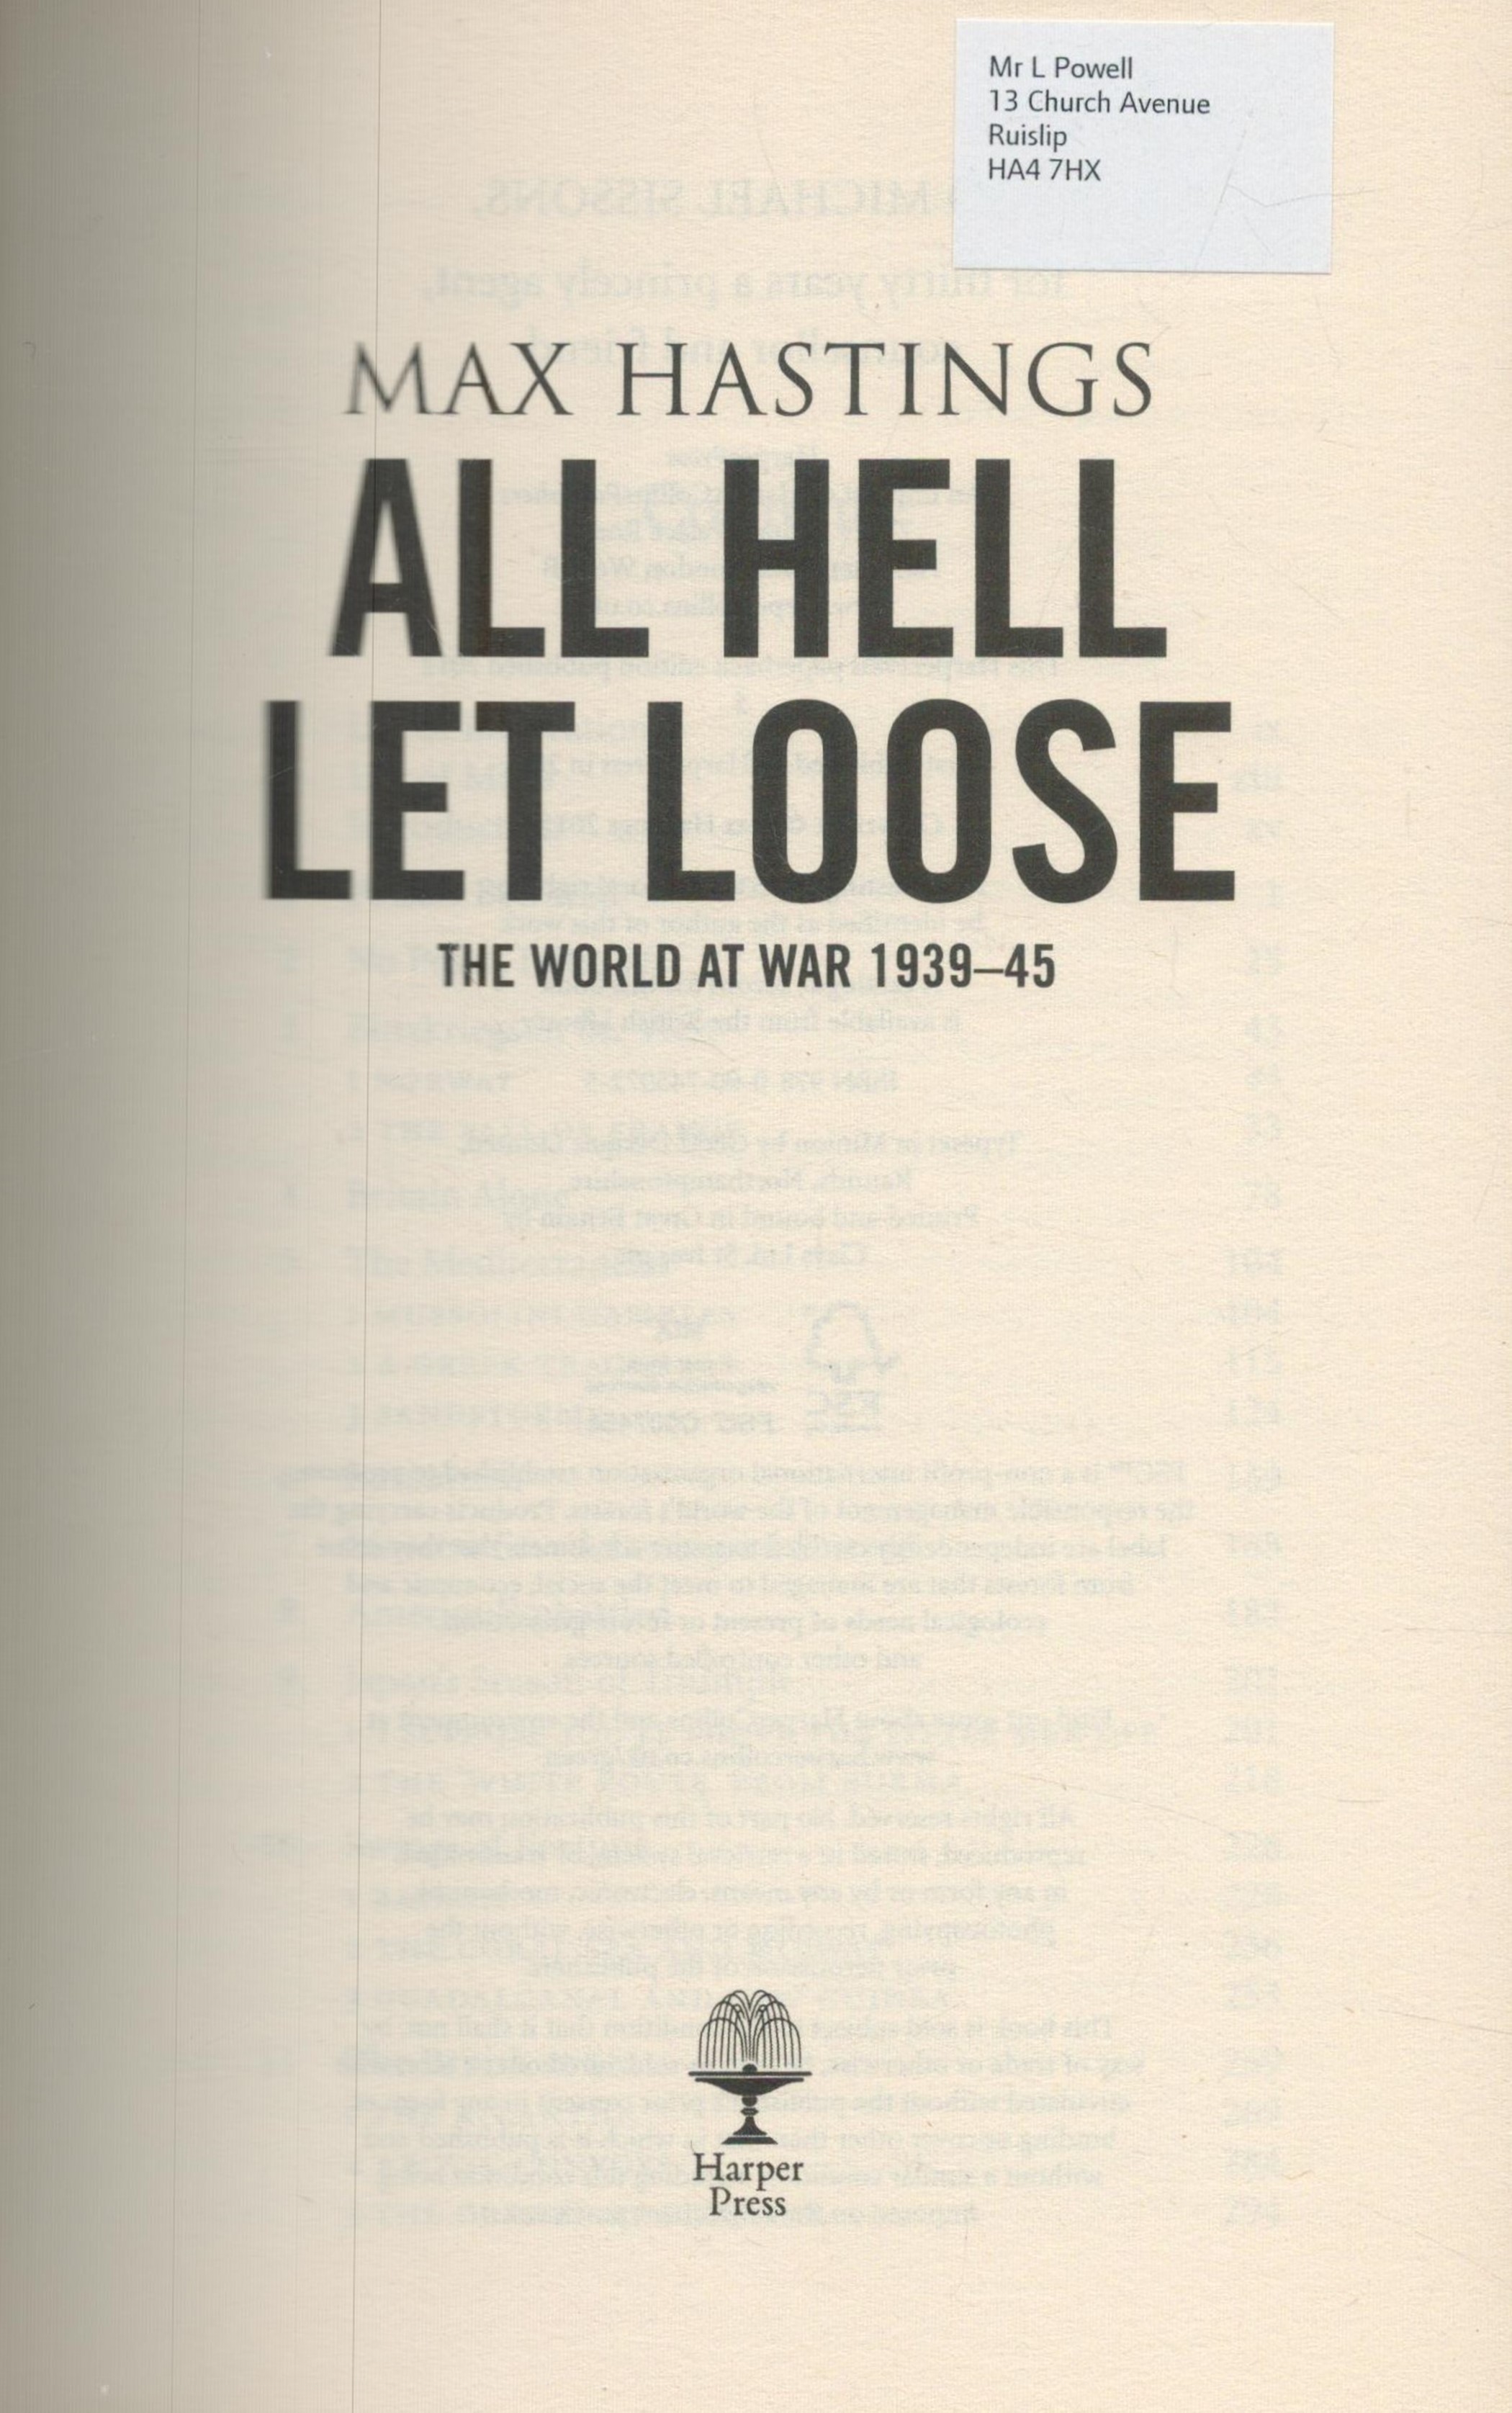 All Hell Let Loose - The World at War 1939-1945 by Max Hastings 2012 Softback Book with 748 pages - Image 5 of 9